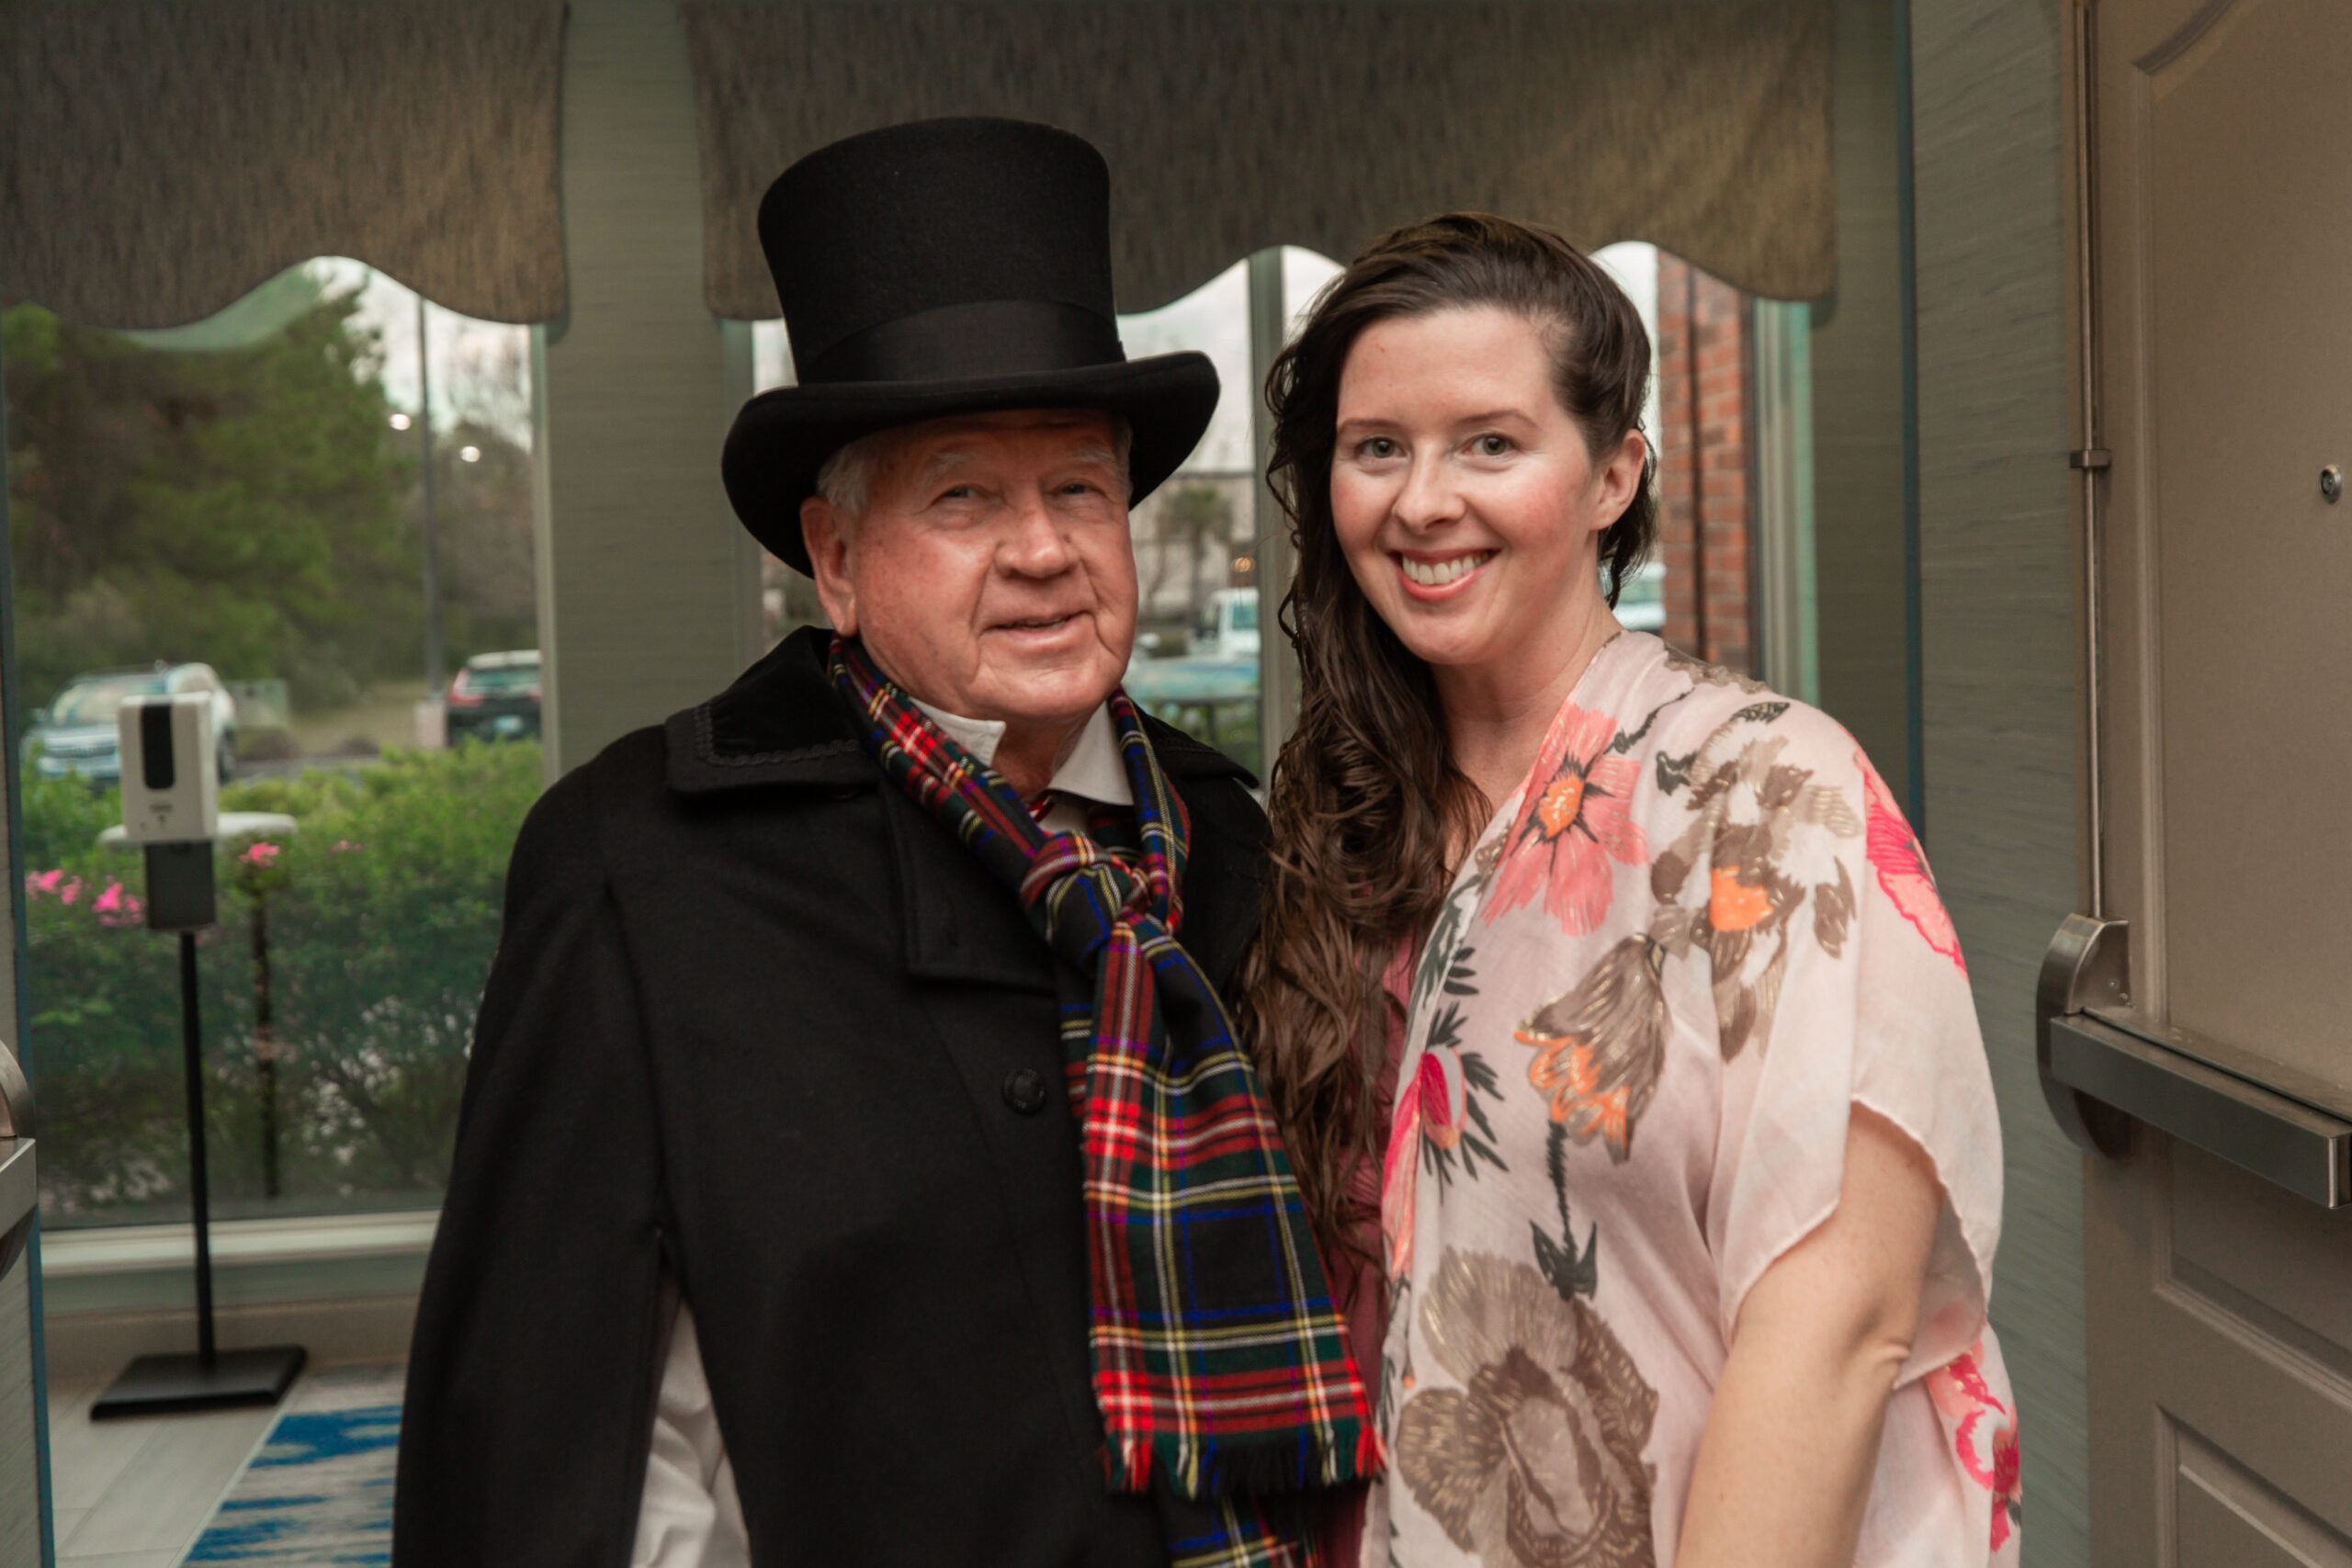 Embodying a Christmas Carol with Commercial Sales Agent Johnny Edge and Marketing Director Megan Parker